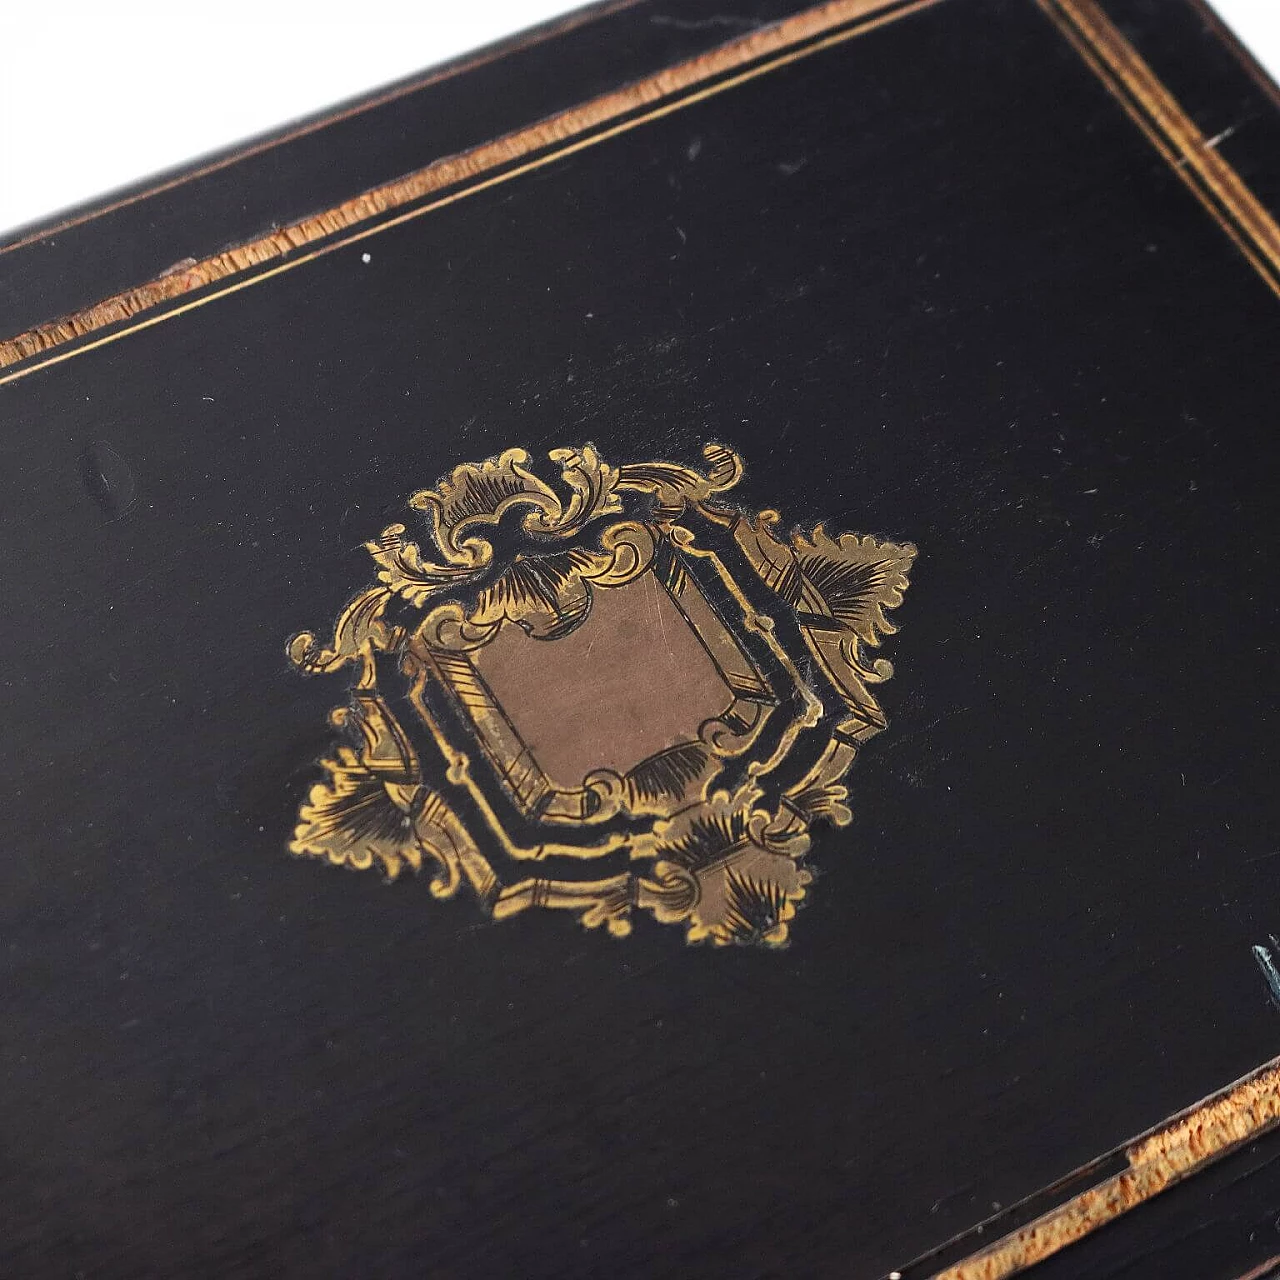 Ebony veneer sewing box with inlay and brass profiles, 19th century 16